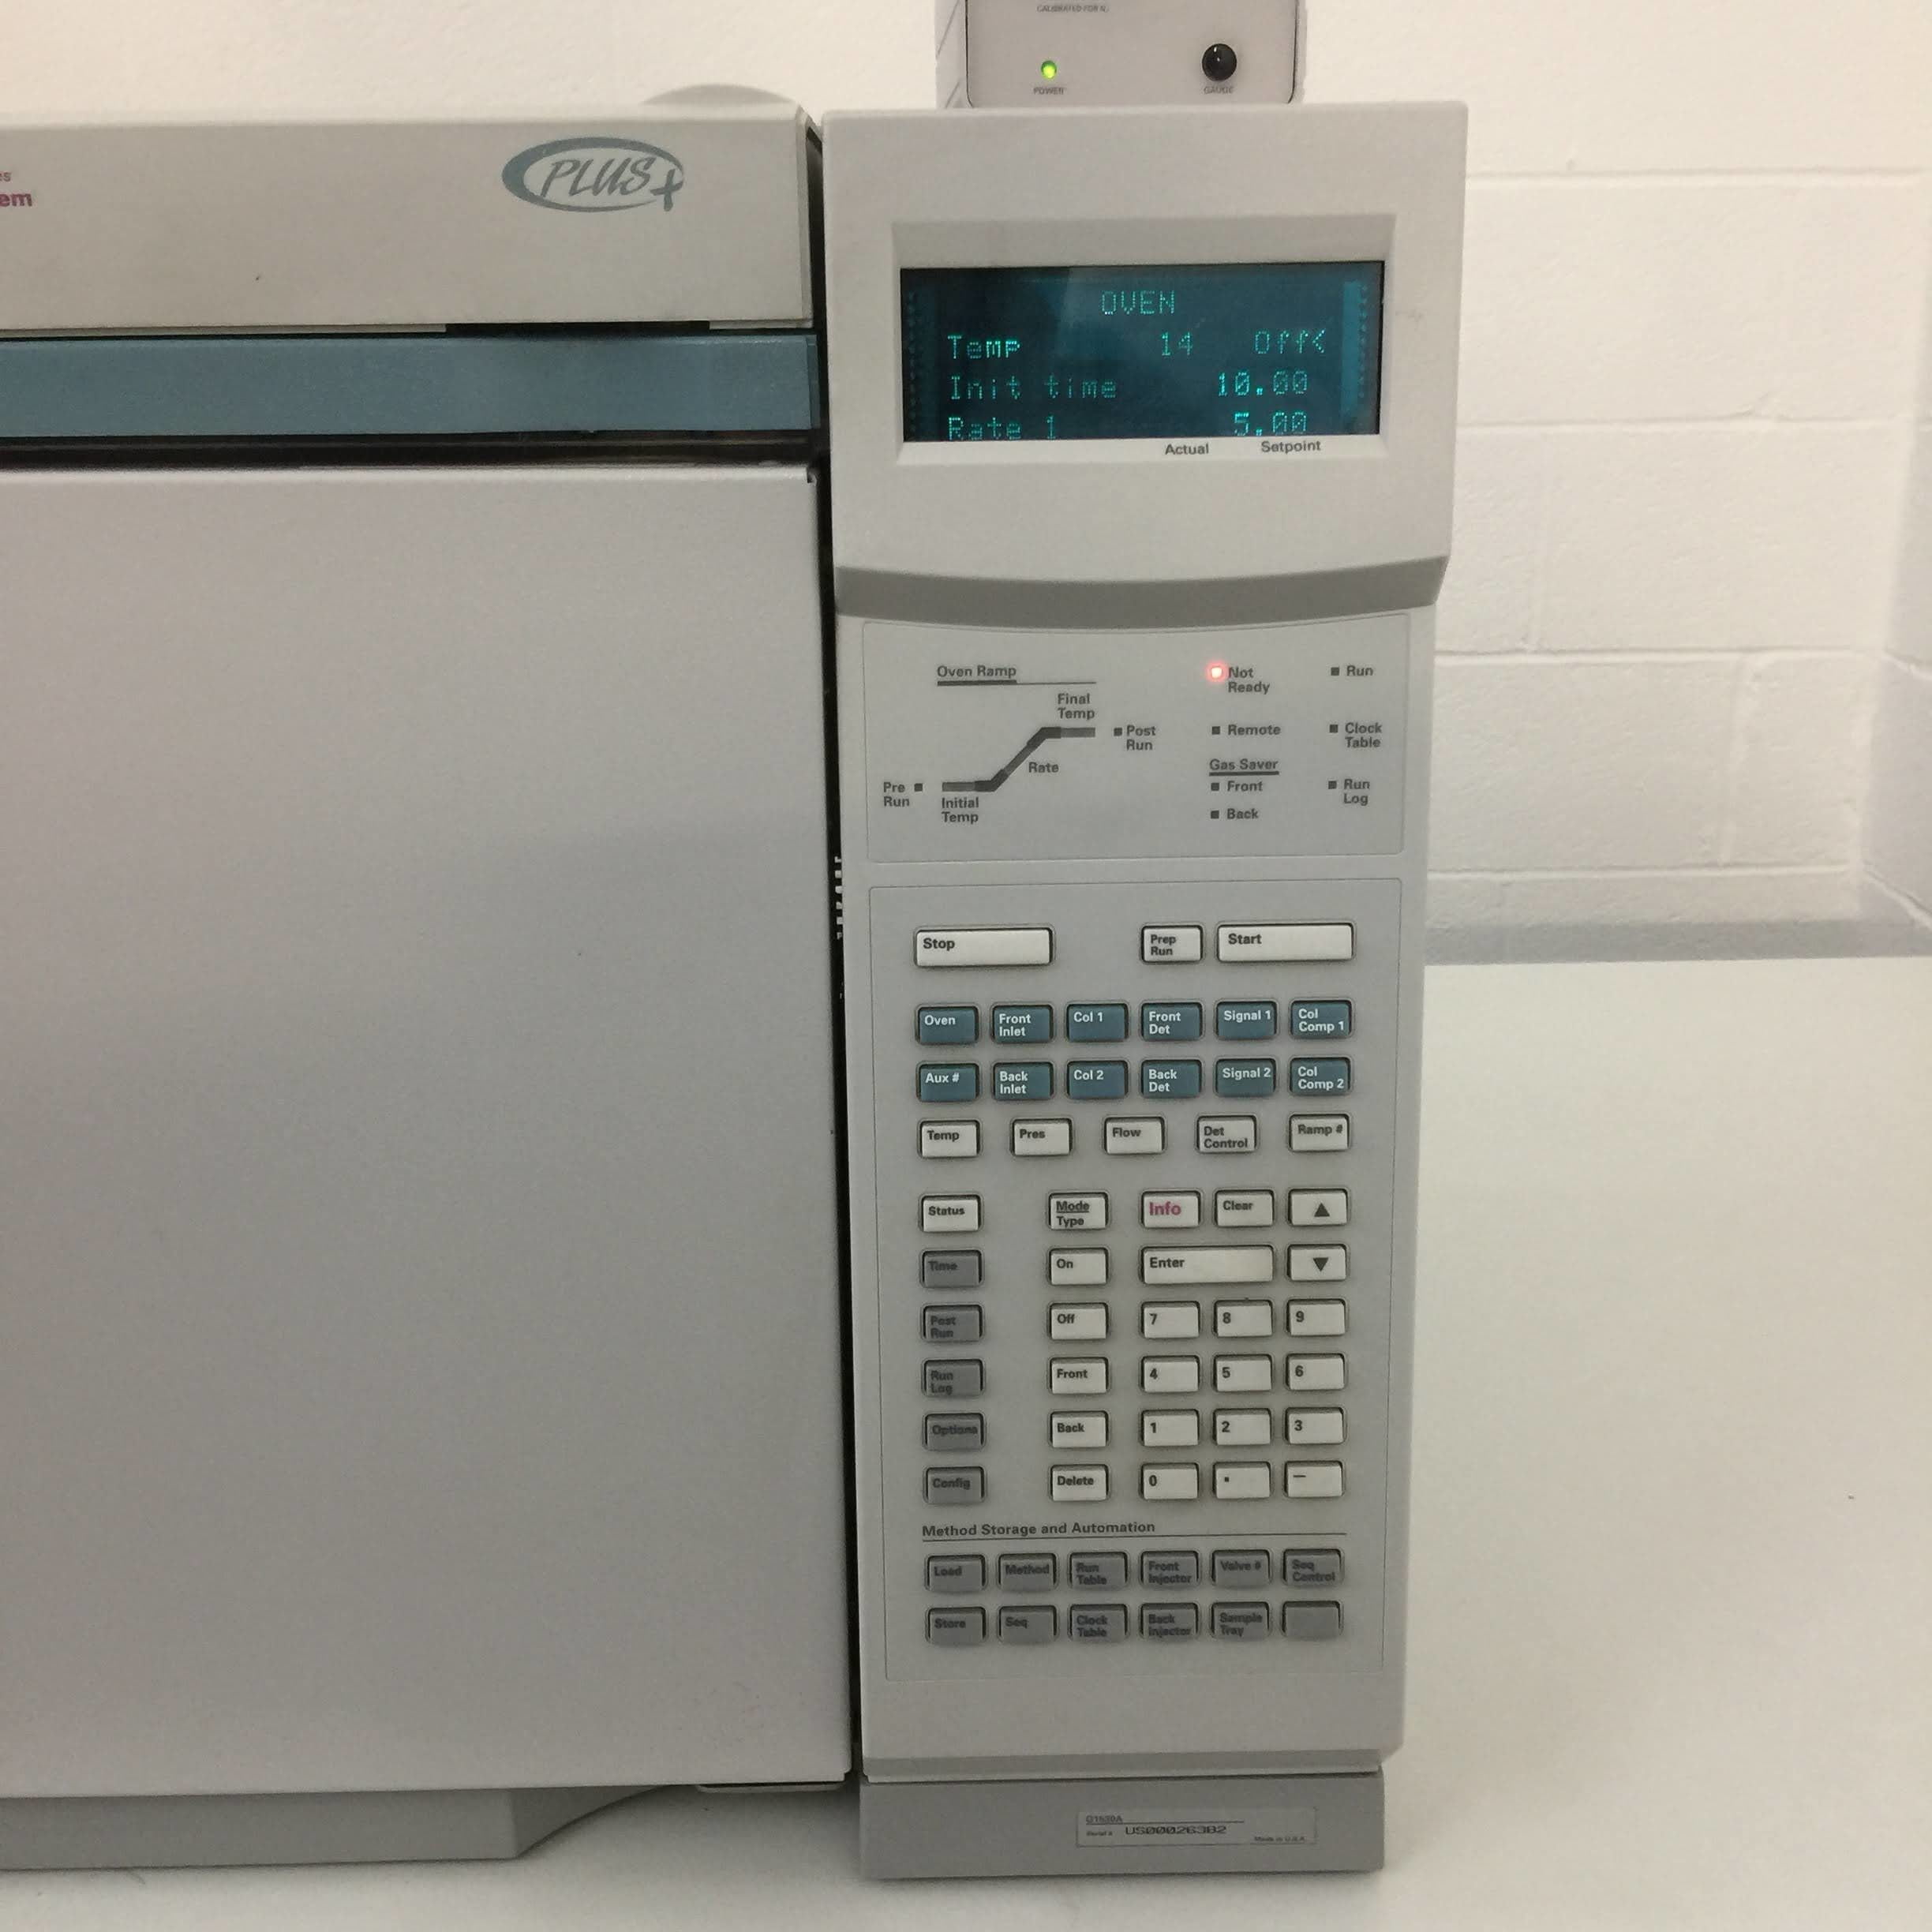 agilent hp 6890 series gas chromatograph system, 5973 mass selective detector and 7683 series injector